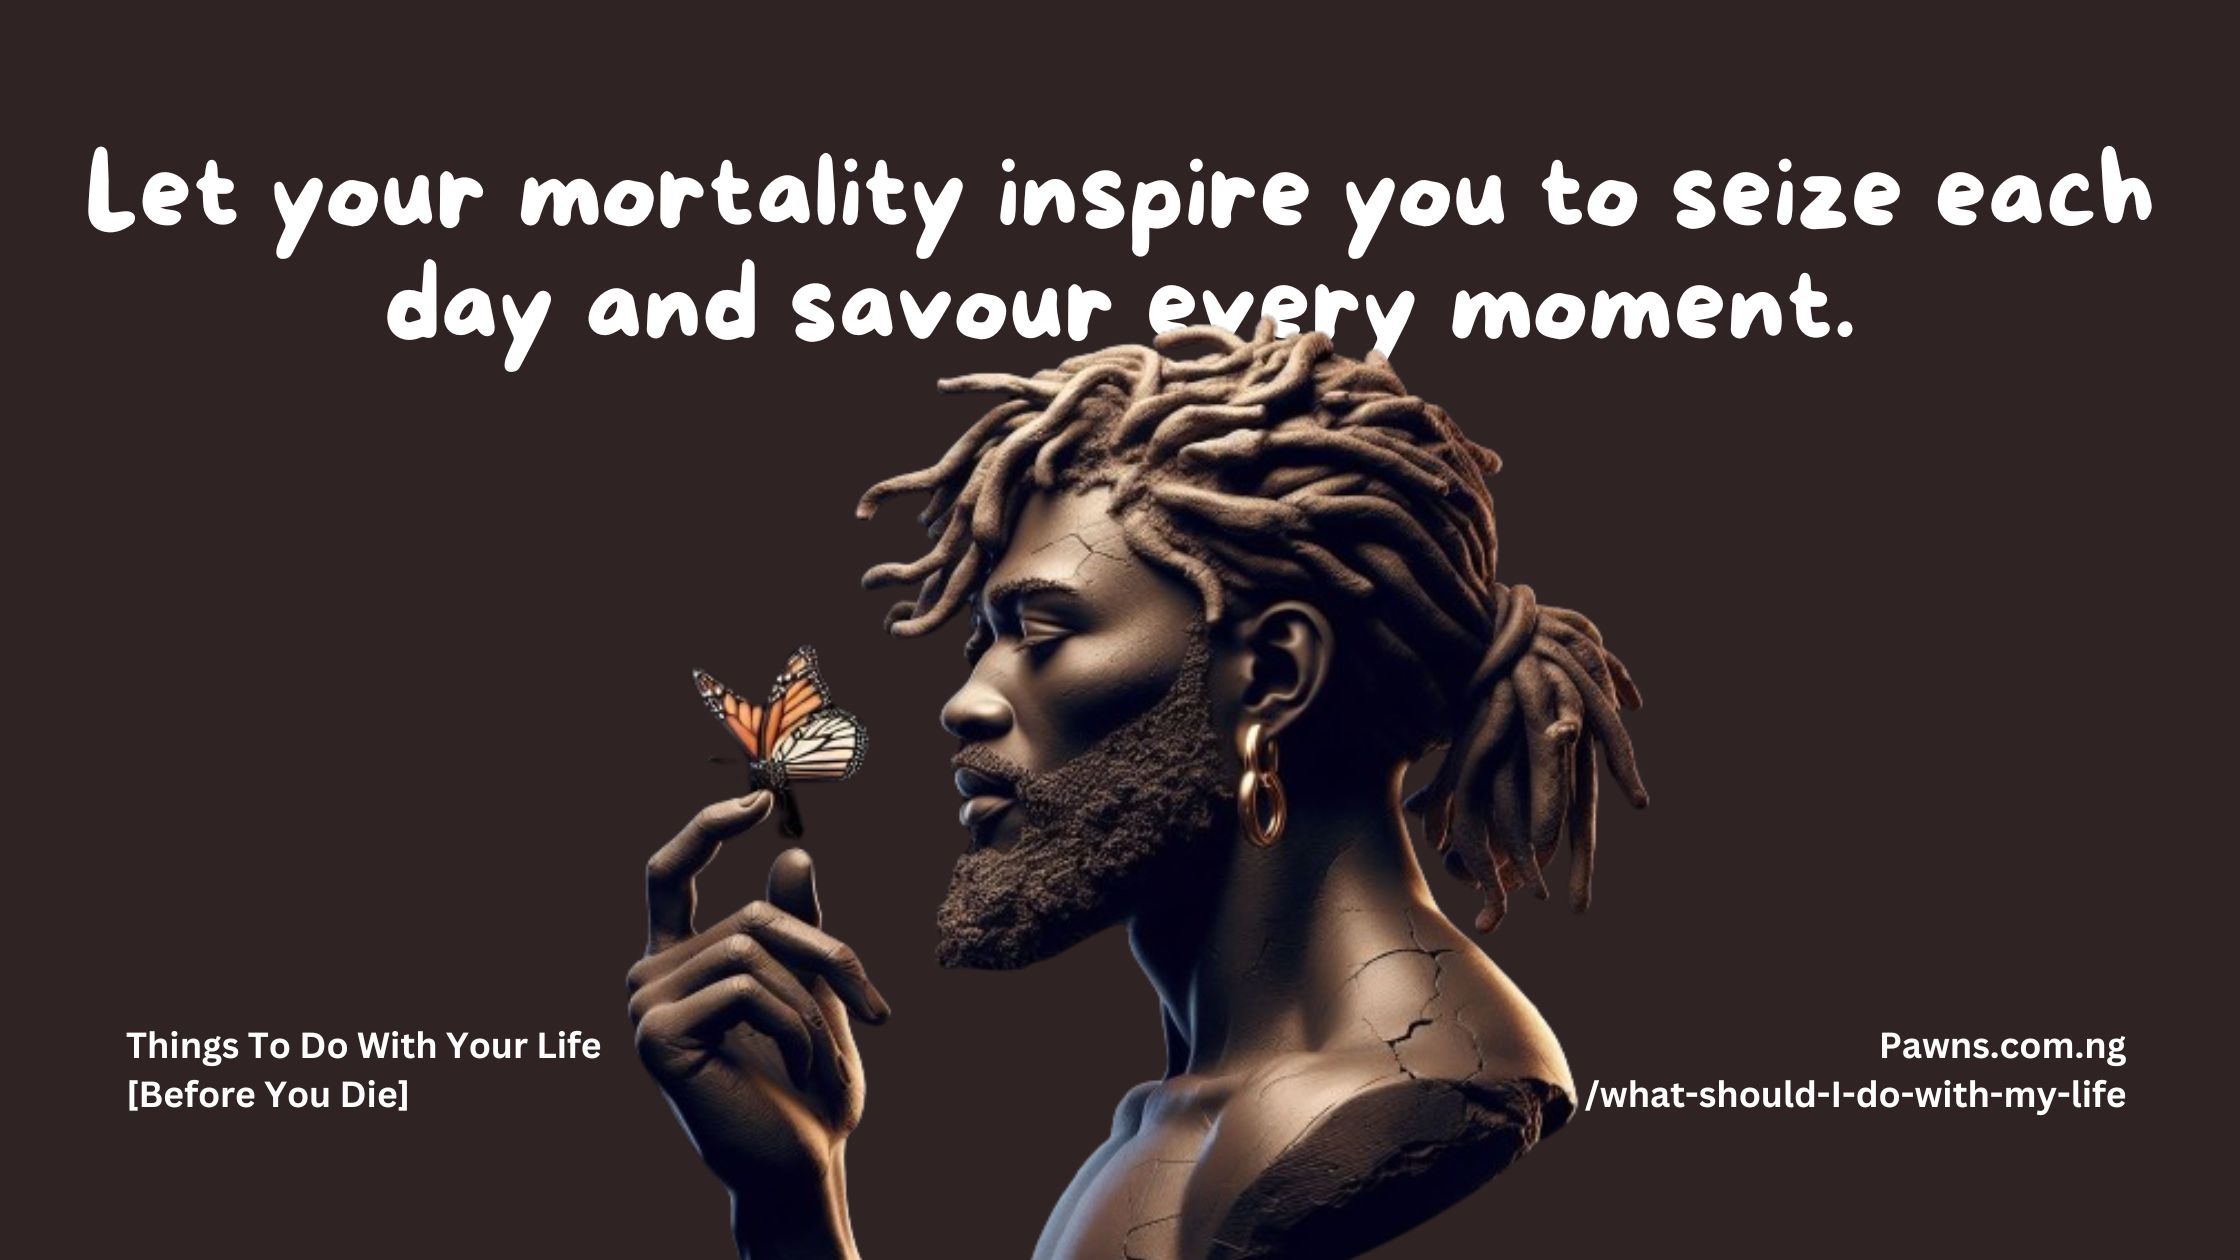 Let your mortality inspire you to seize each day and savour every moment. Things To Do With Your Life Before You Die